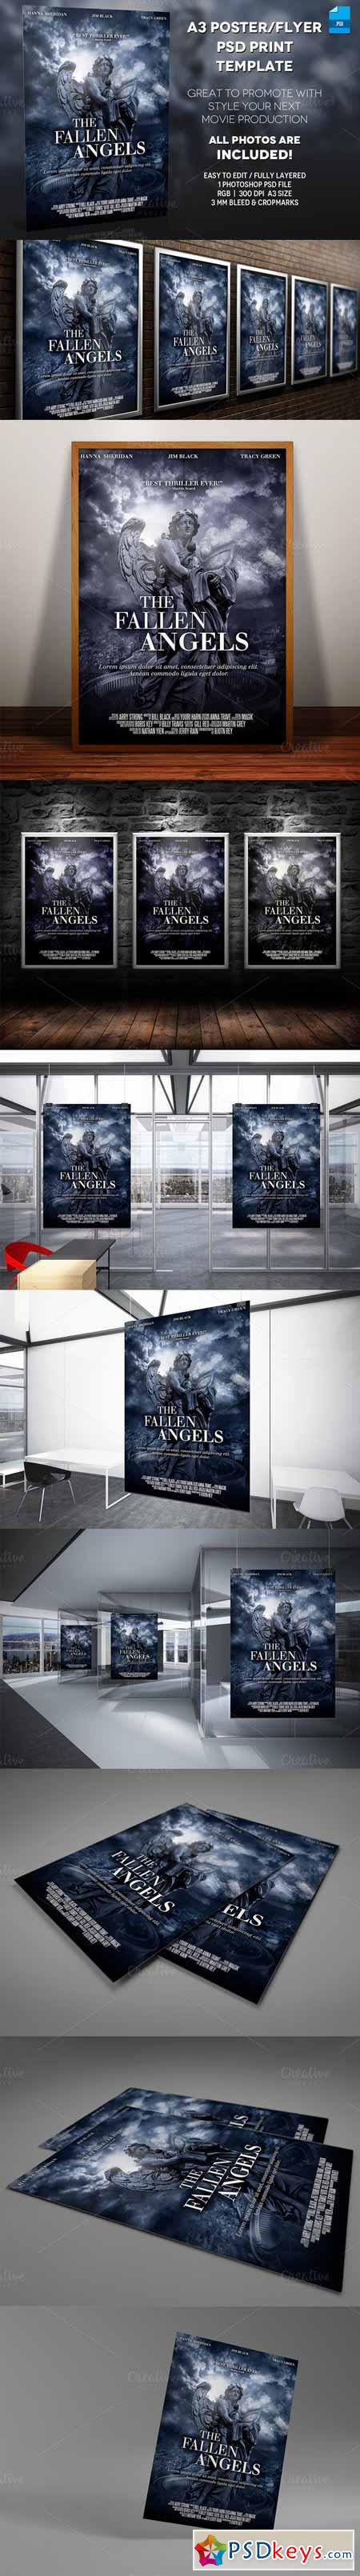 11 Photoshop Movie Poster Templates Free Images - Blank Movie Poster